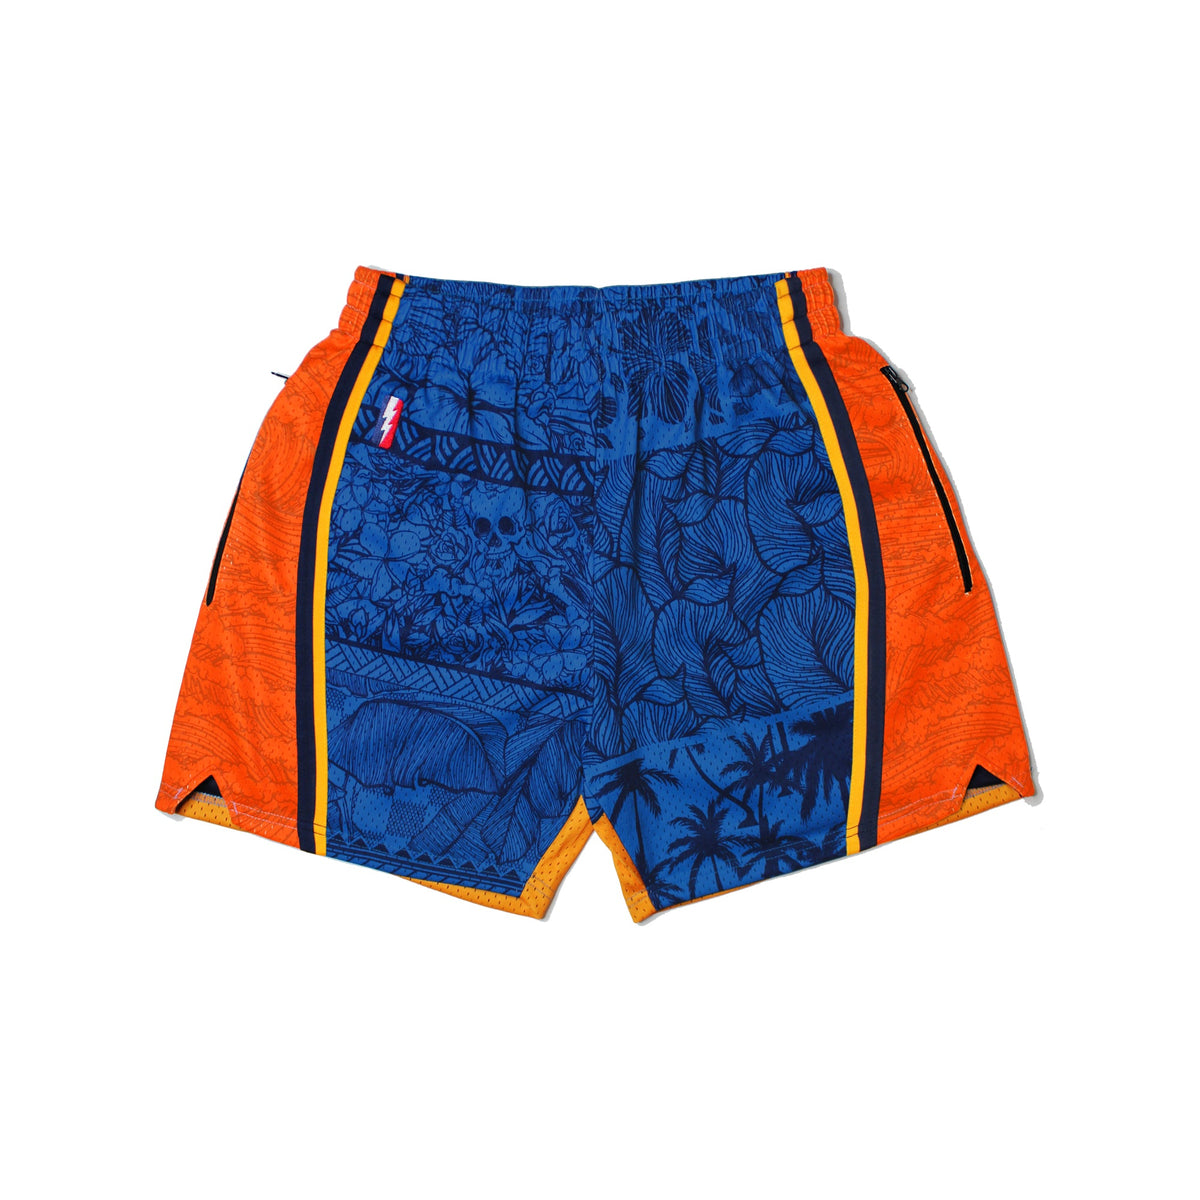 Collect And Select Timberwolves Shorts XS for Sale in Tiverton, RI